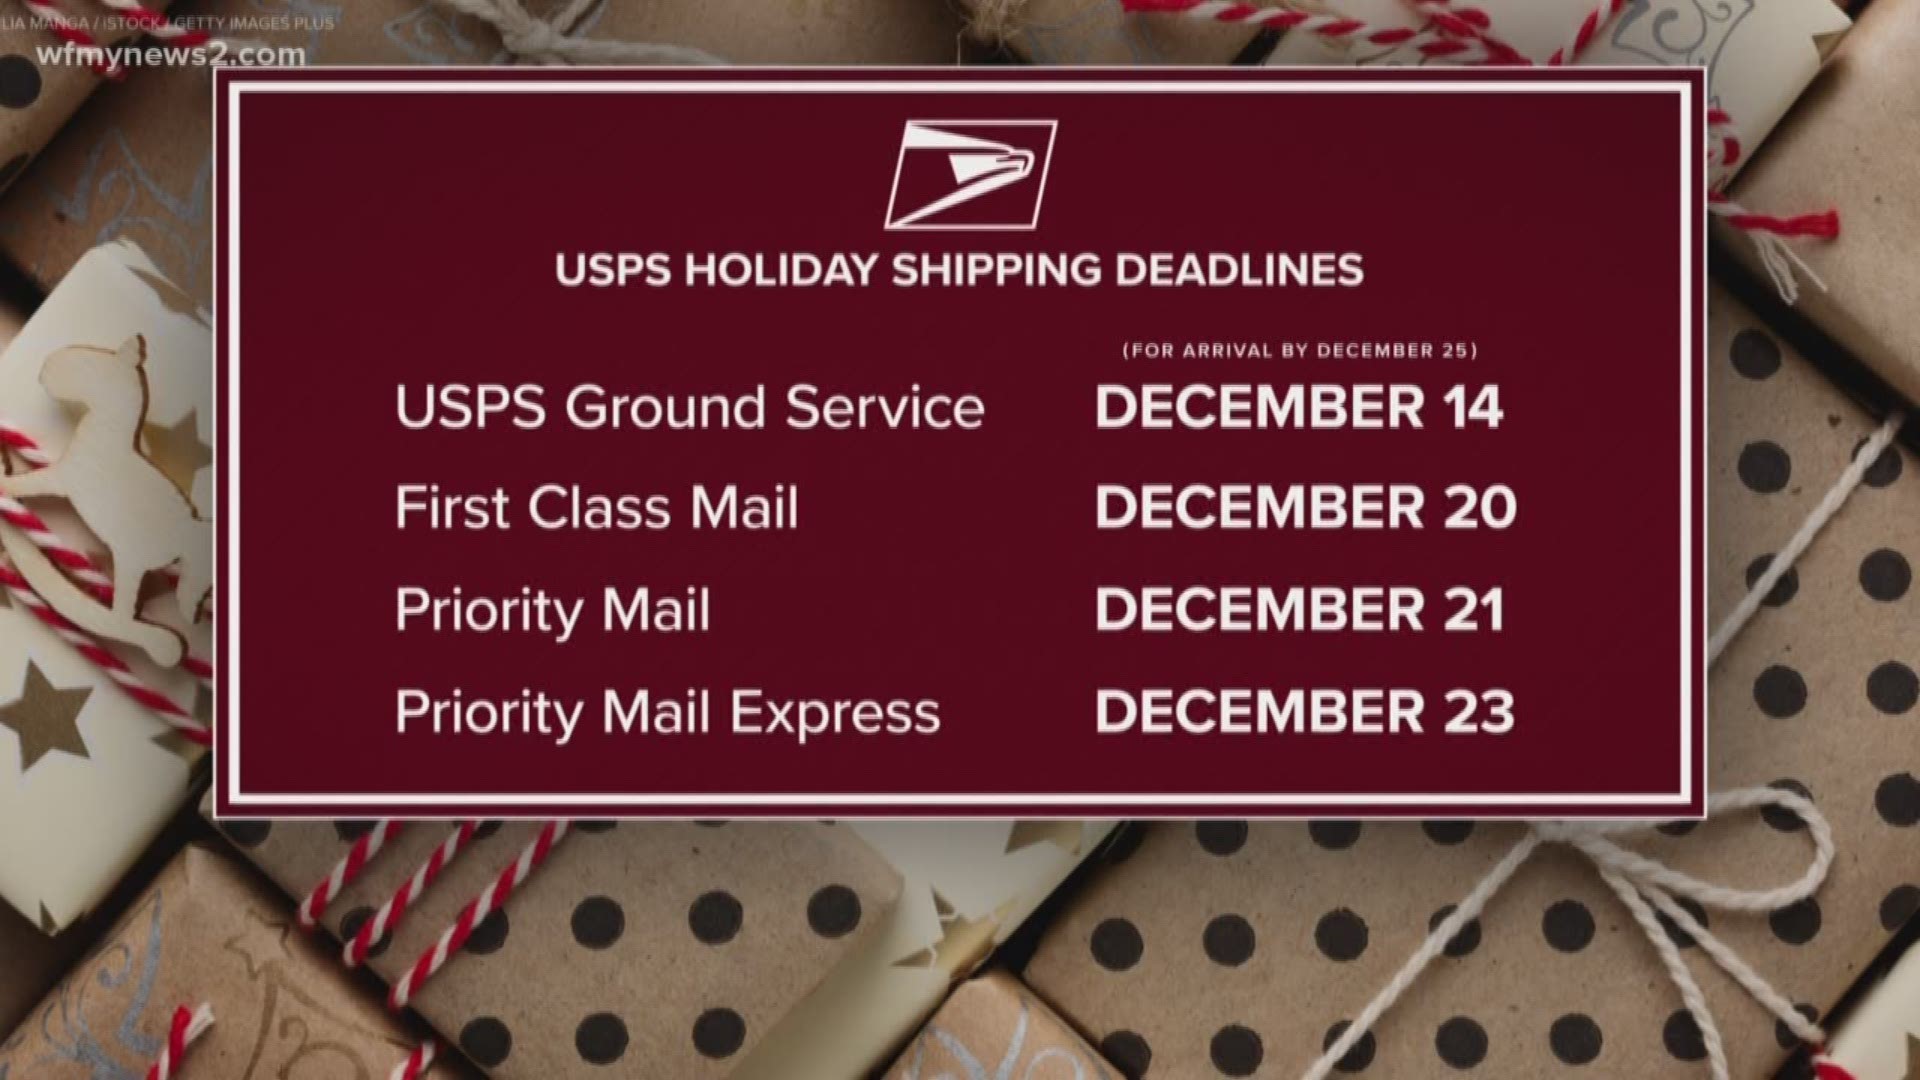 The holidays are a little over a month away, but if you must ship gifts to loved ones, you won't want to wait around.